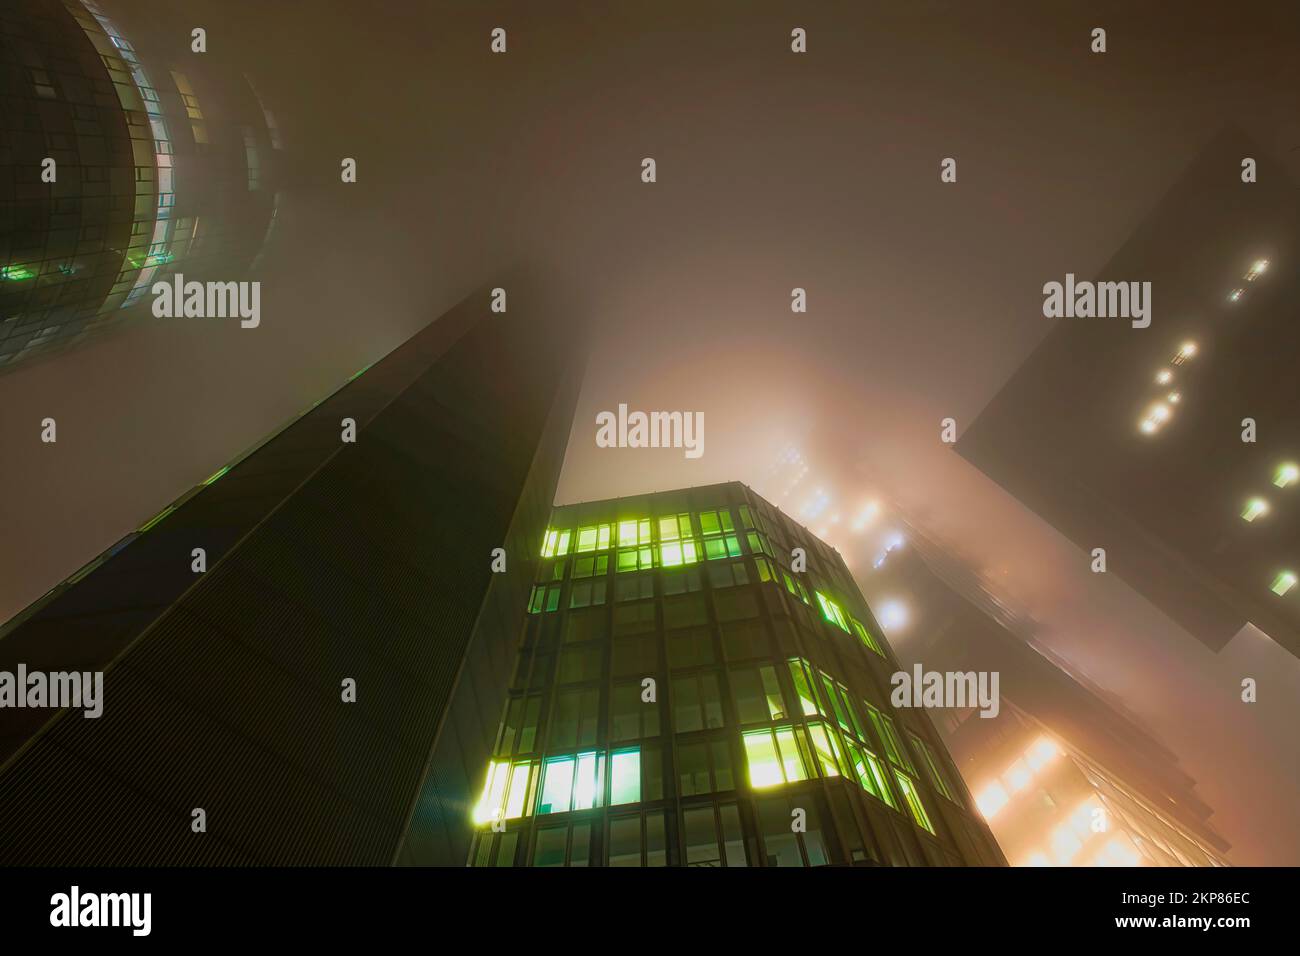 Illuminated skyscrapers in the fog at night, Garden Tower in the middle, Omniturm right behind, Japan Center right, Main Tower left, banking district, Stock Photo